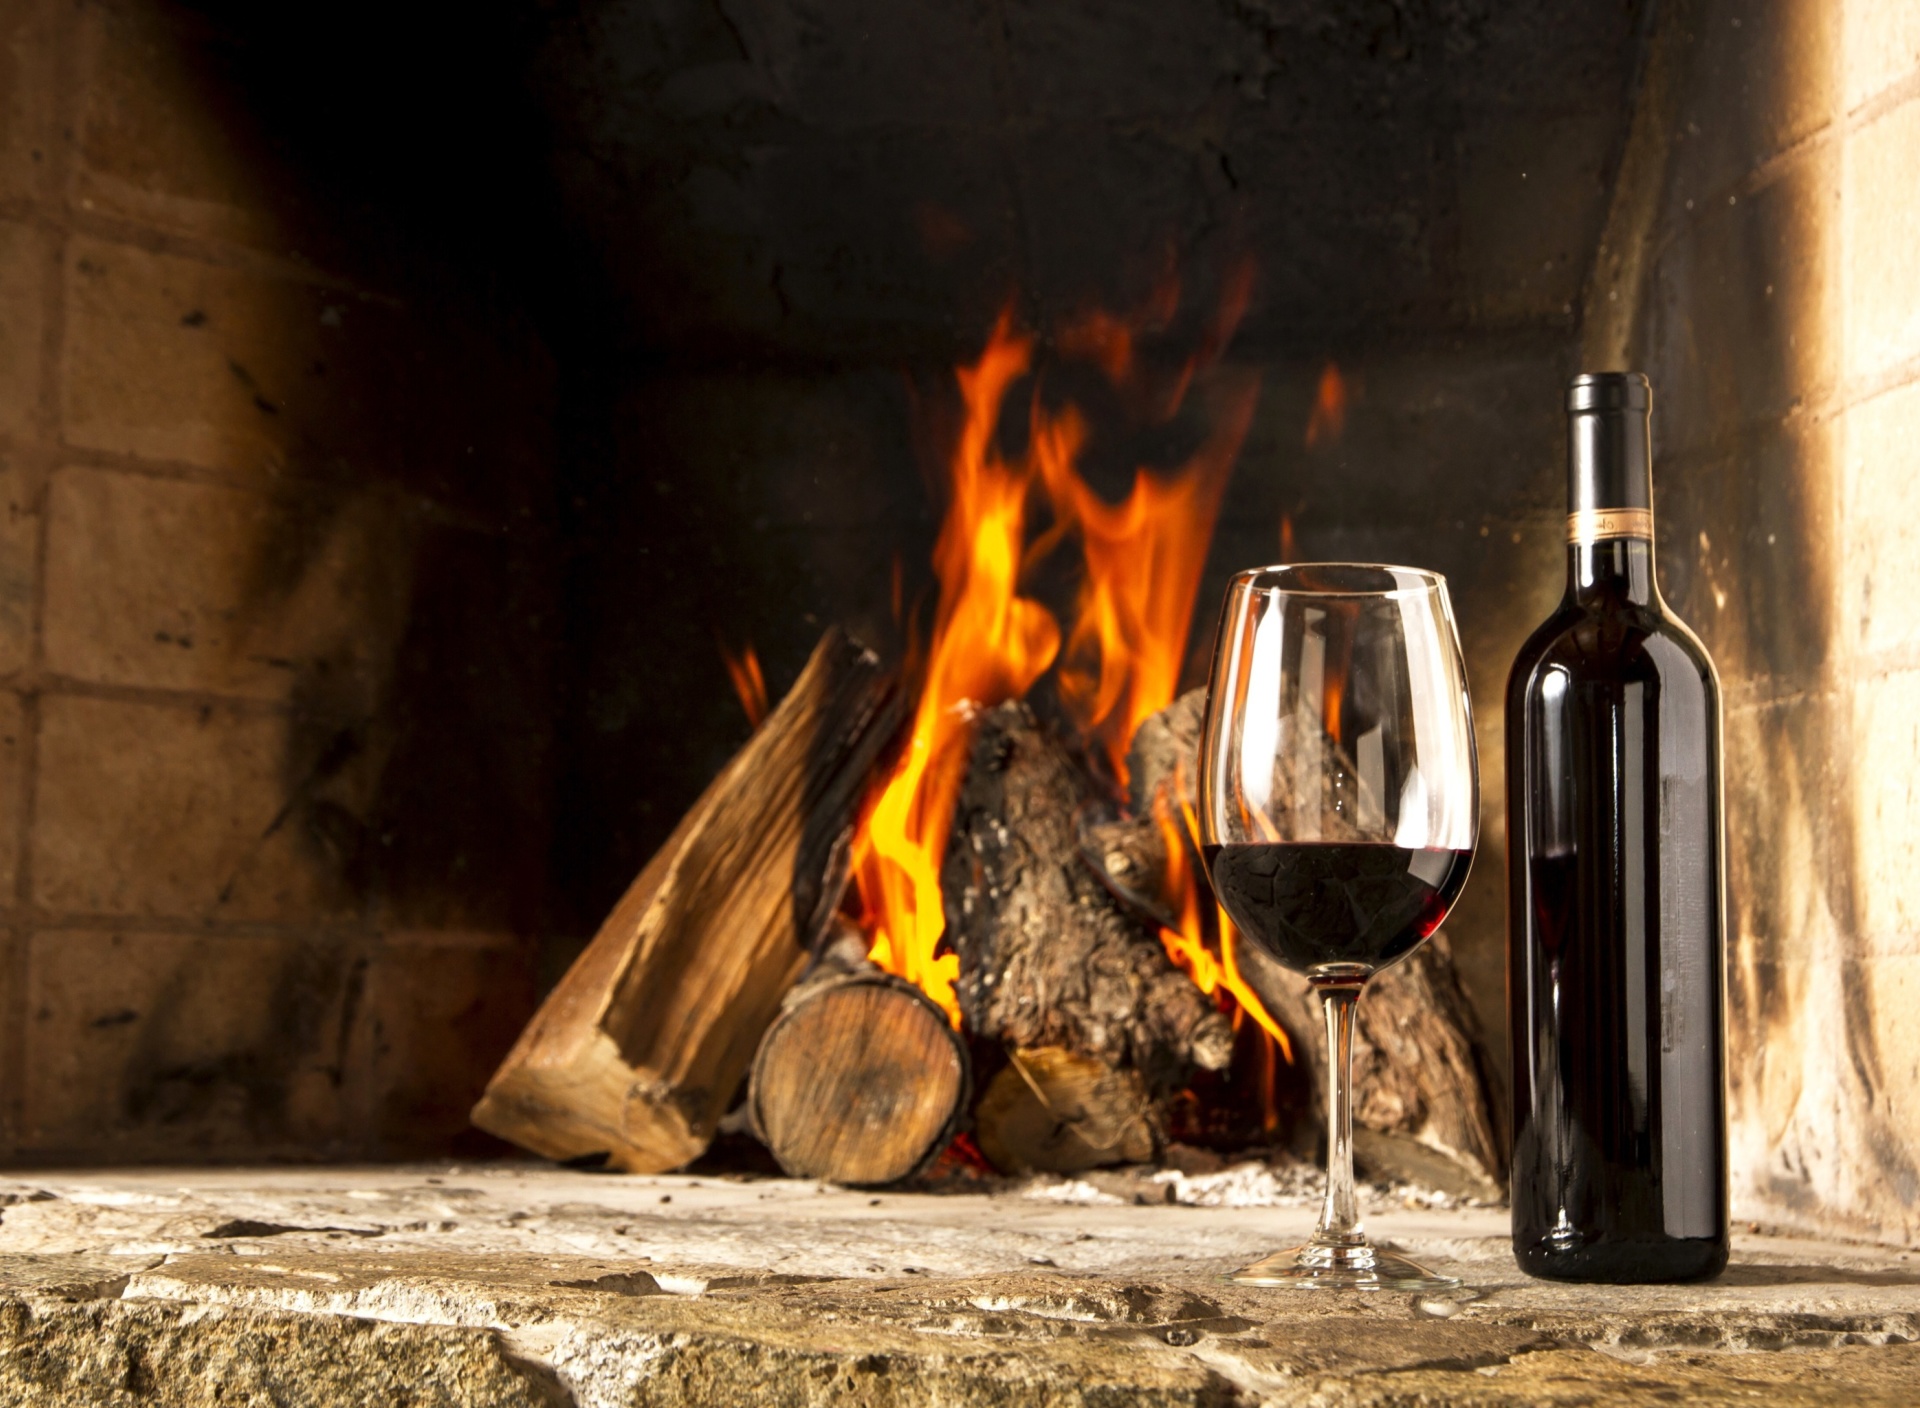 Wine and fireplace wallpaper 1920x1408